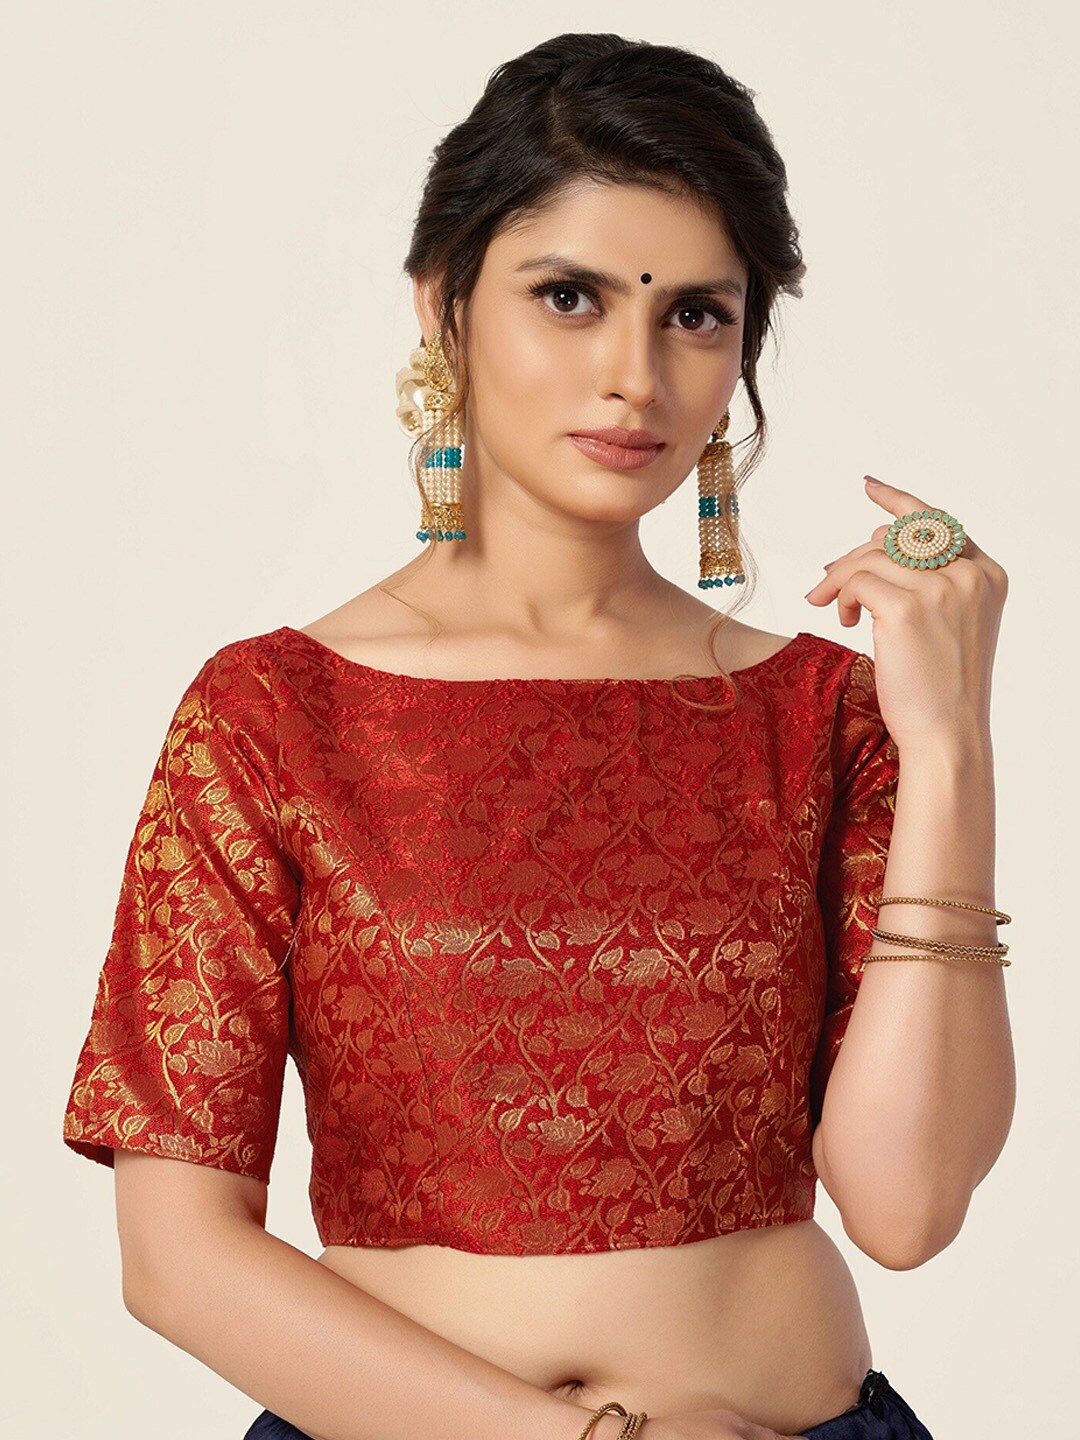 HIMRISE Women Maroon & Gold-Toned Printed Saree Blouse Price in India